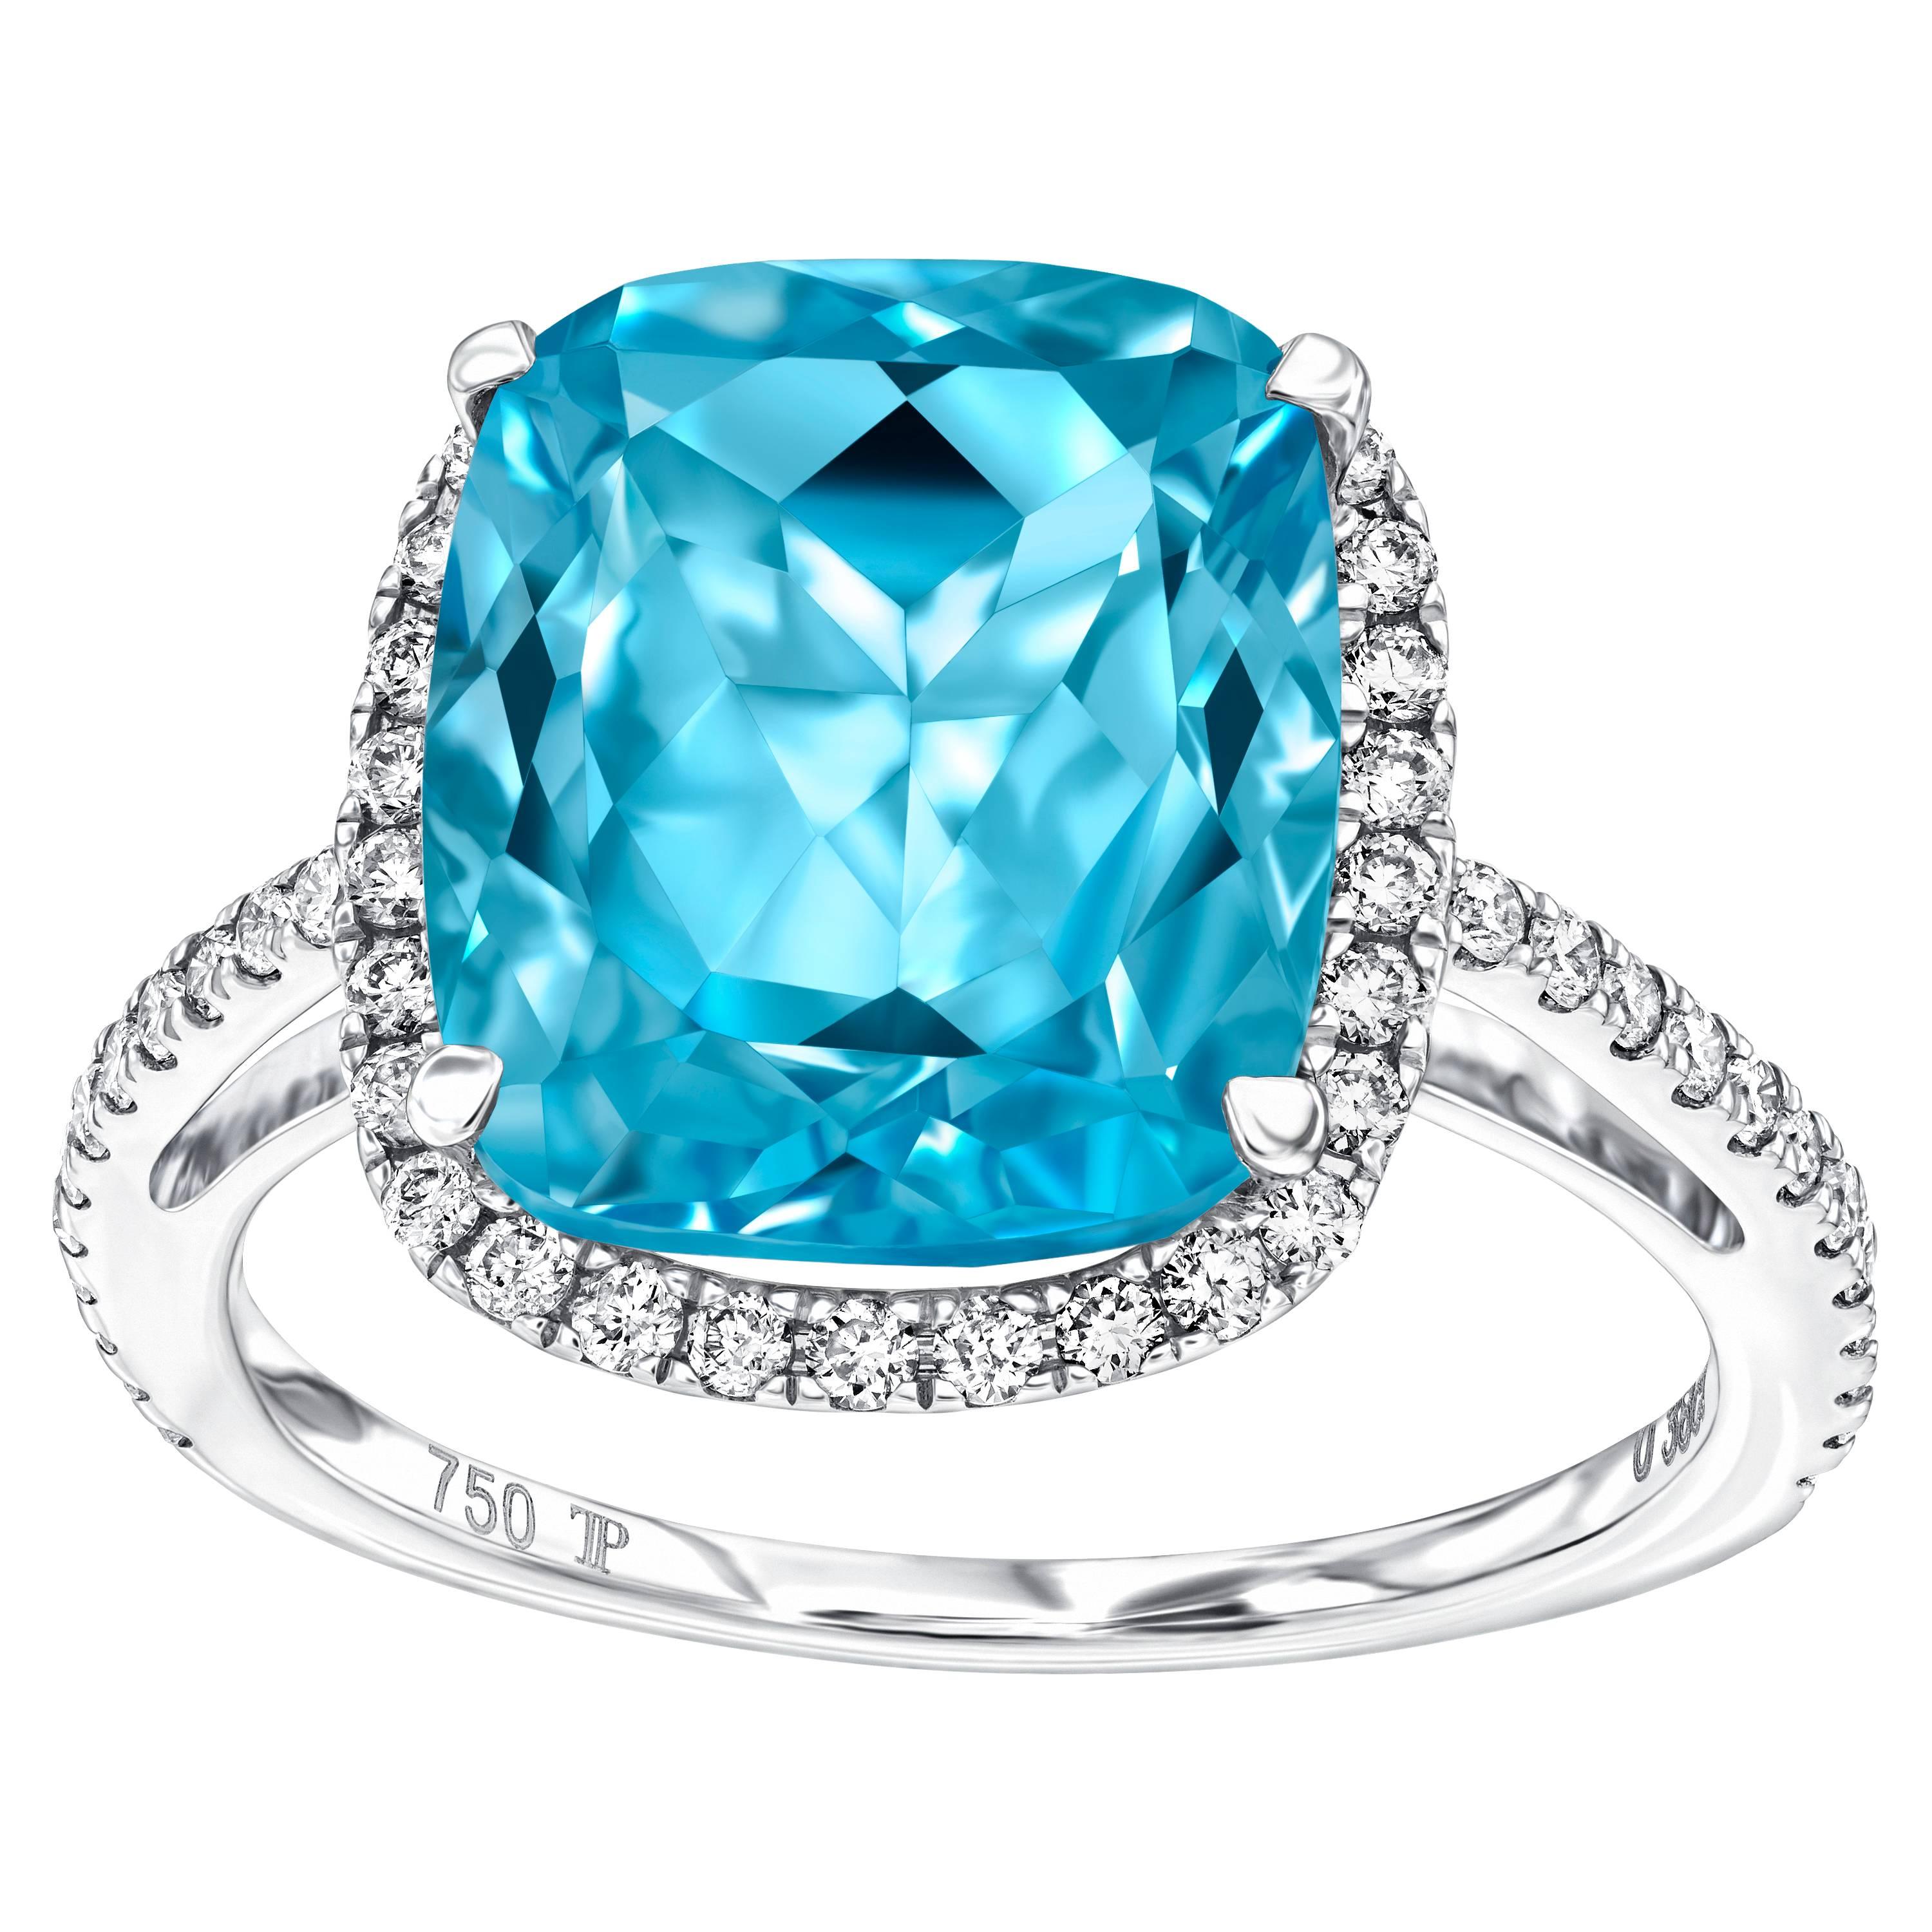 This Outstanding 6.50 Carat Cushion Cut Blue Topaz Engagement Ring surrounded by a pave set halo featuring 0.38 Carat Round Brilliant Diamonds. This ring has a total weight of 6.88 Carats, With a quality grading of color White H clarity SI. This